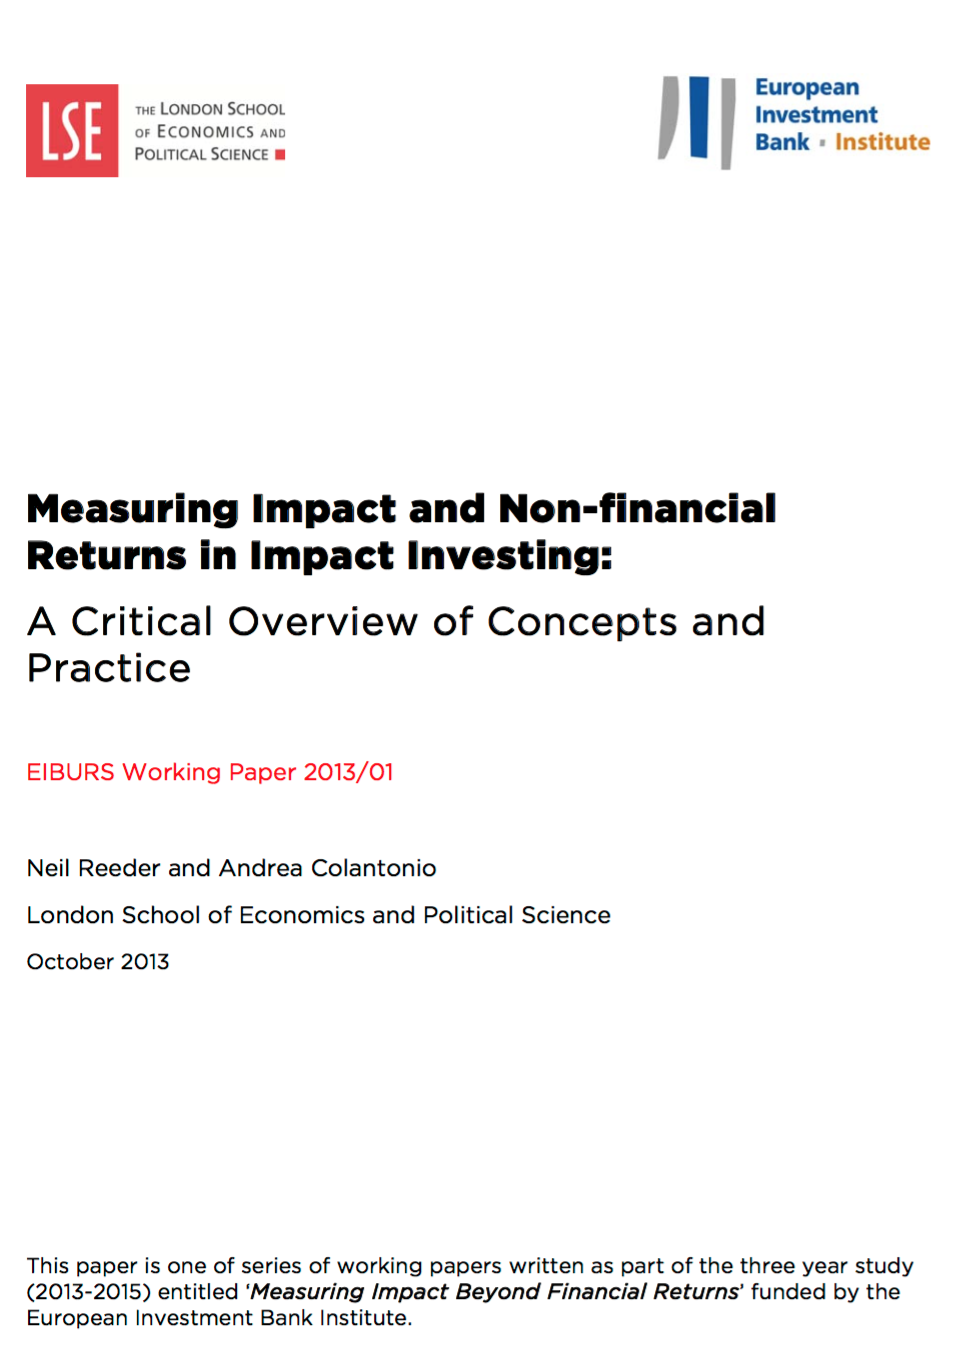 Measuring Impact and Non-financial Returns in Impact Investing